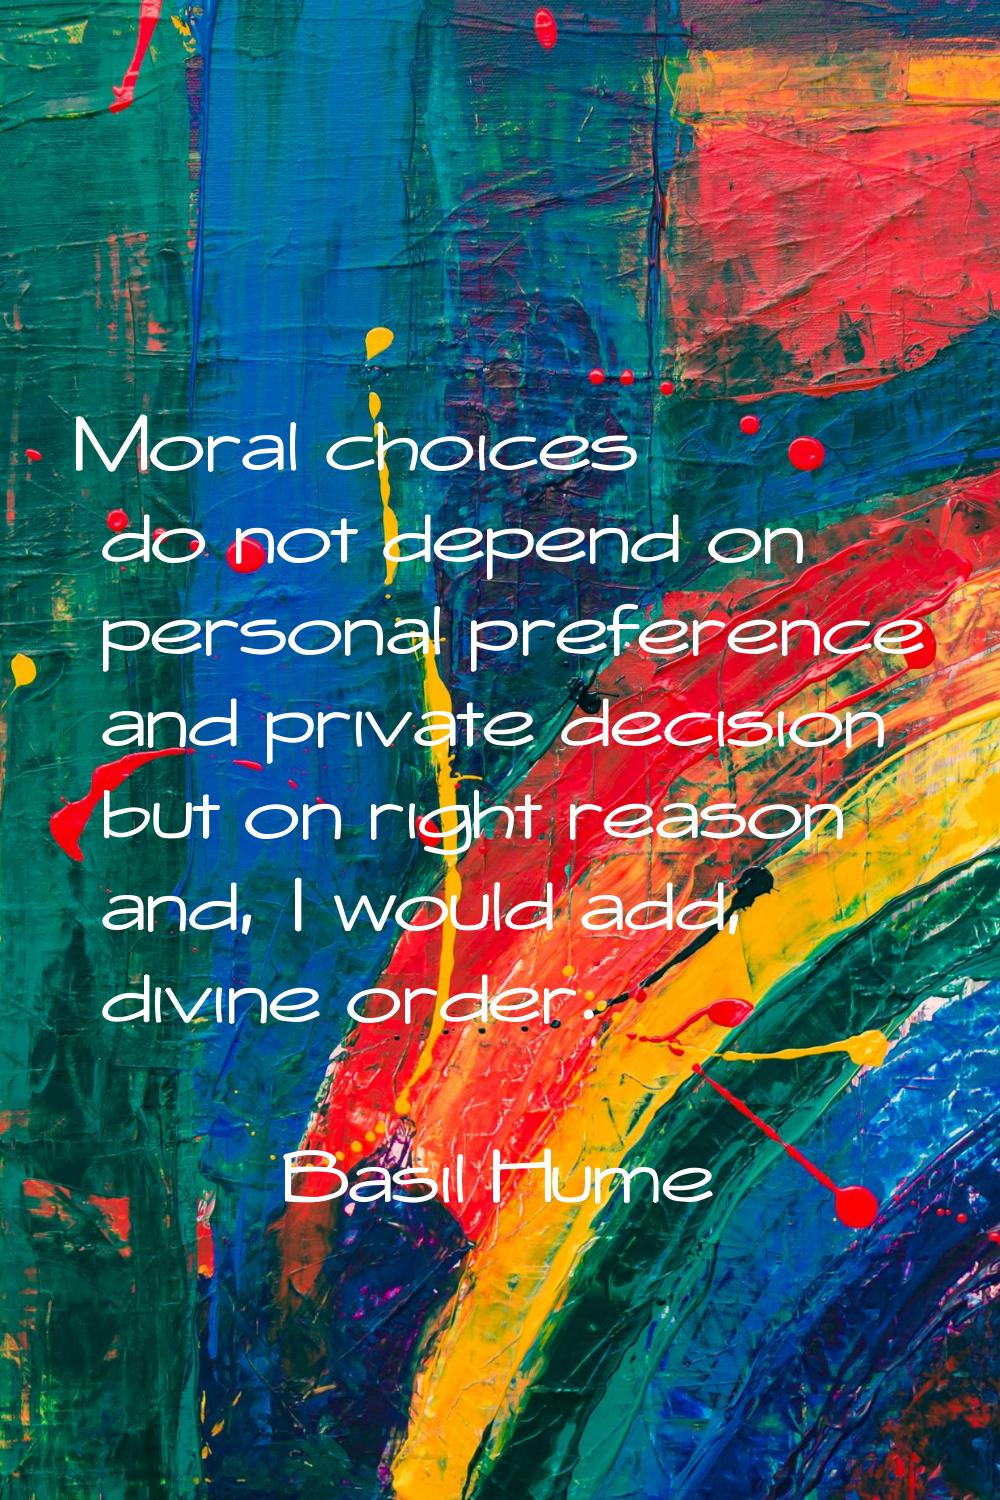 Moral choices do not depend on personal preference and private decision but on right reason and, I 